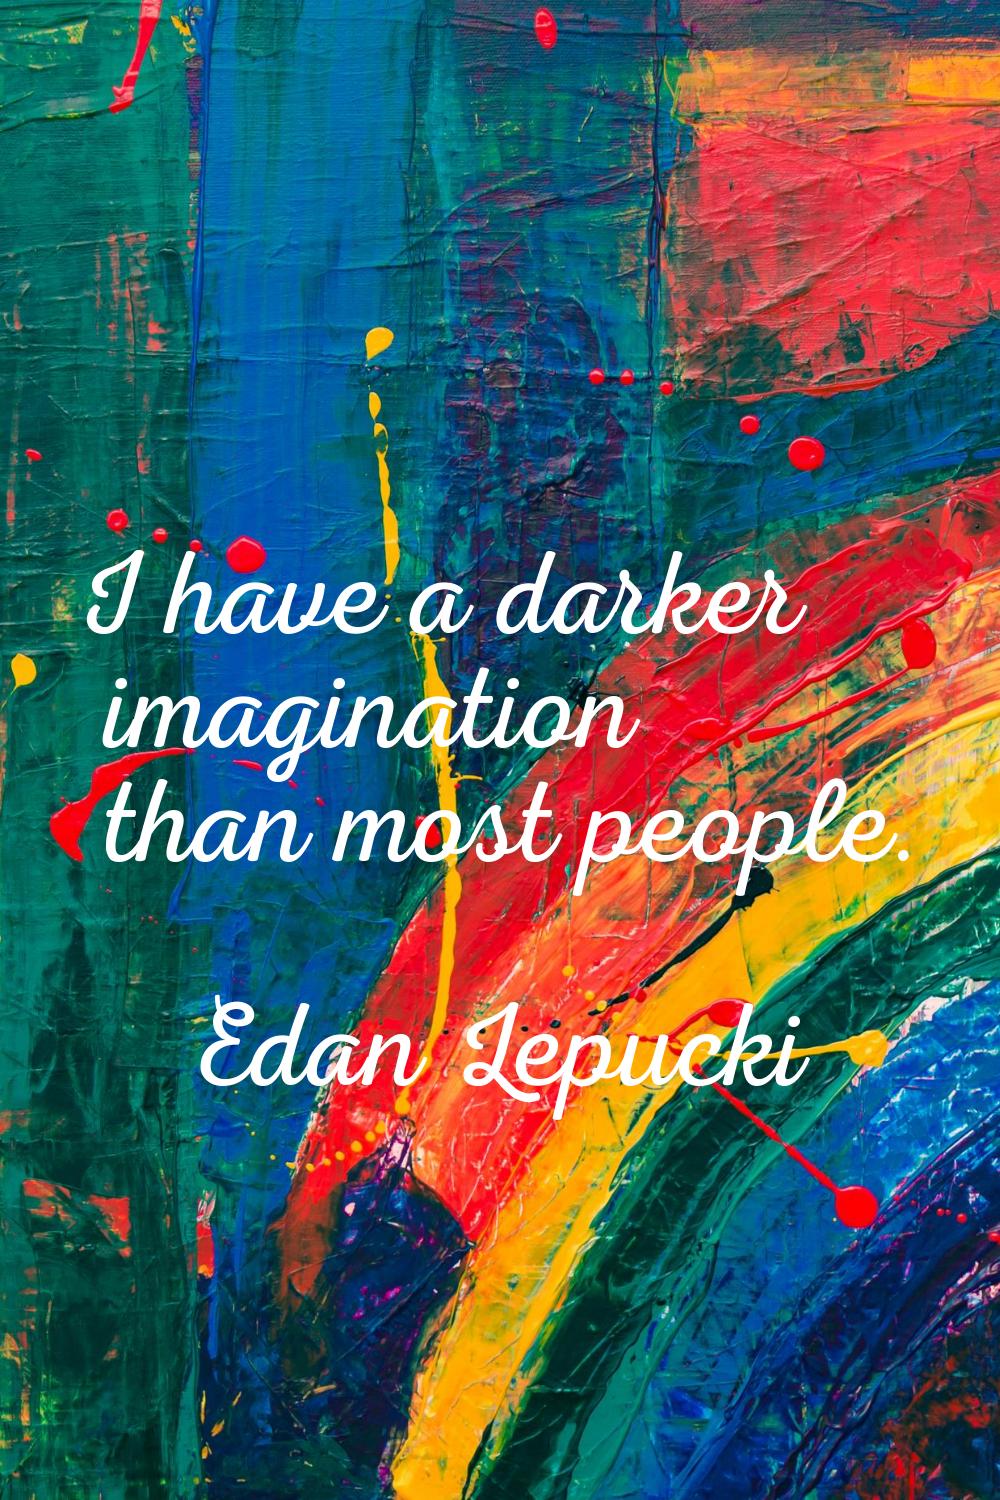 I have a darker imagination than most people.